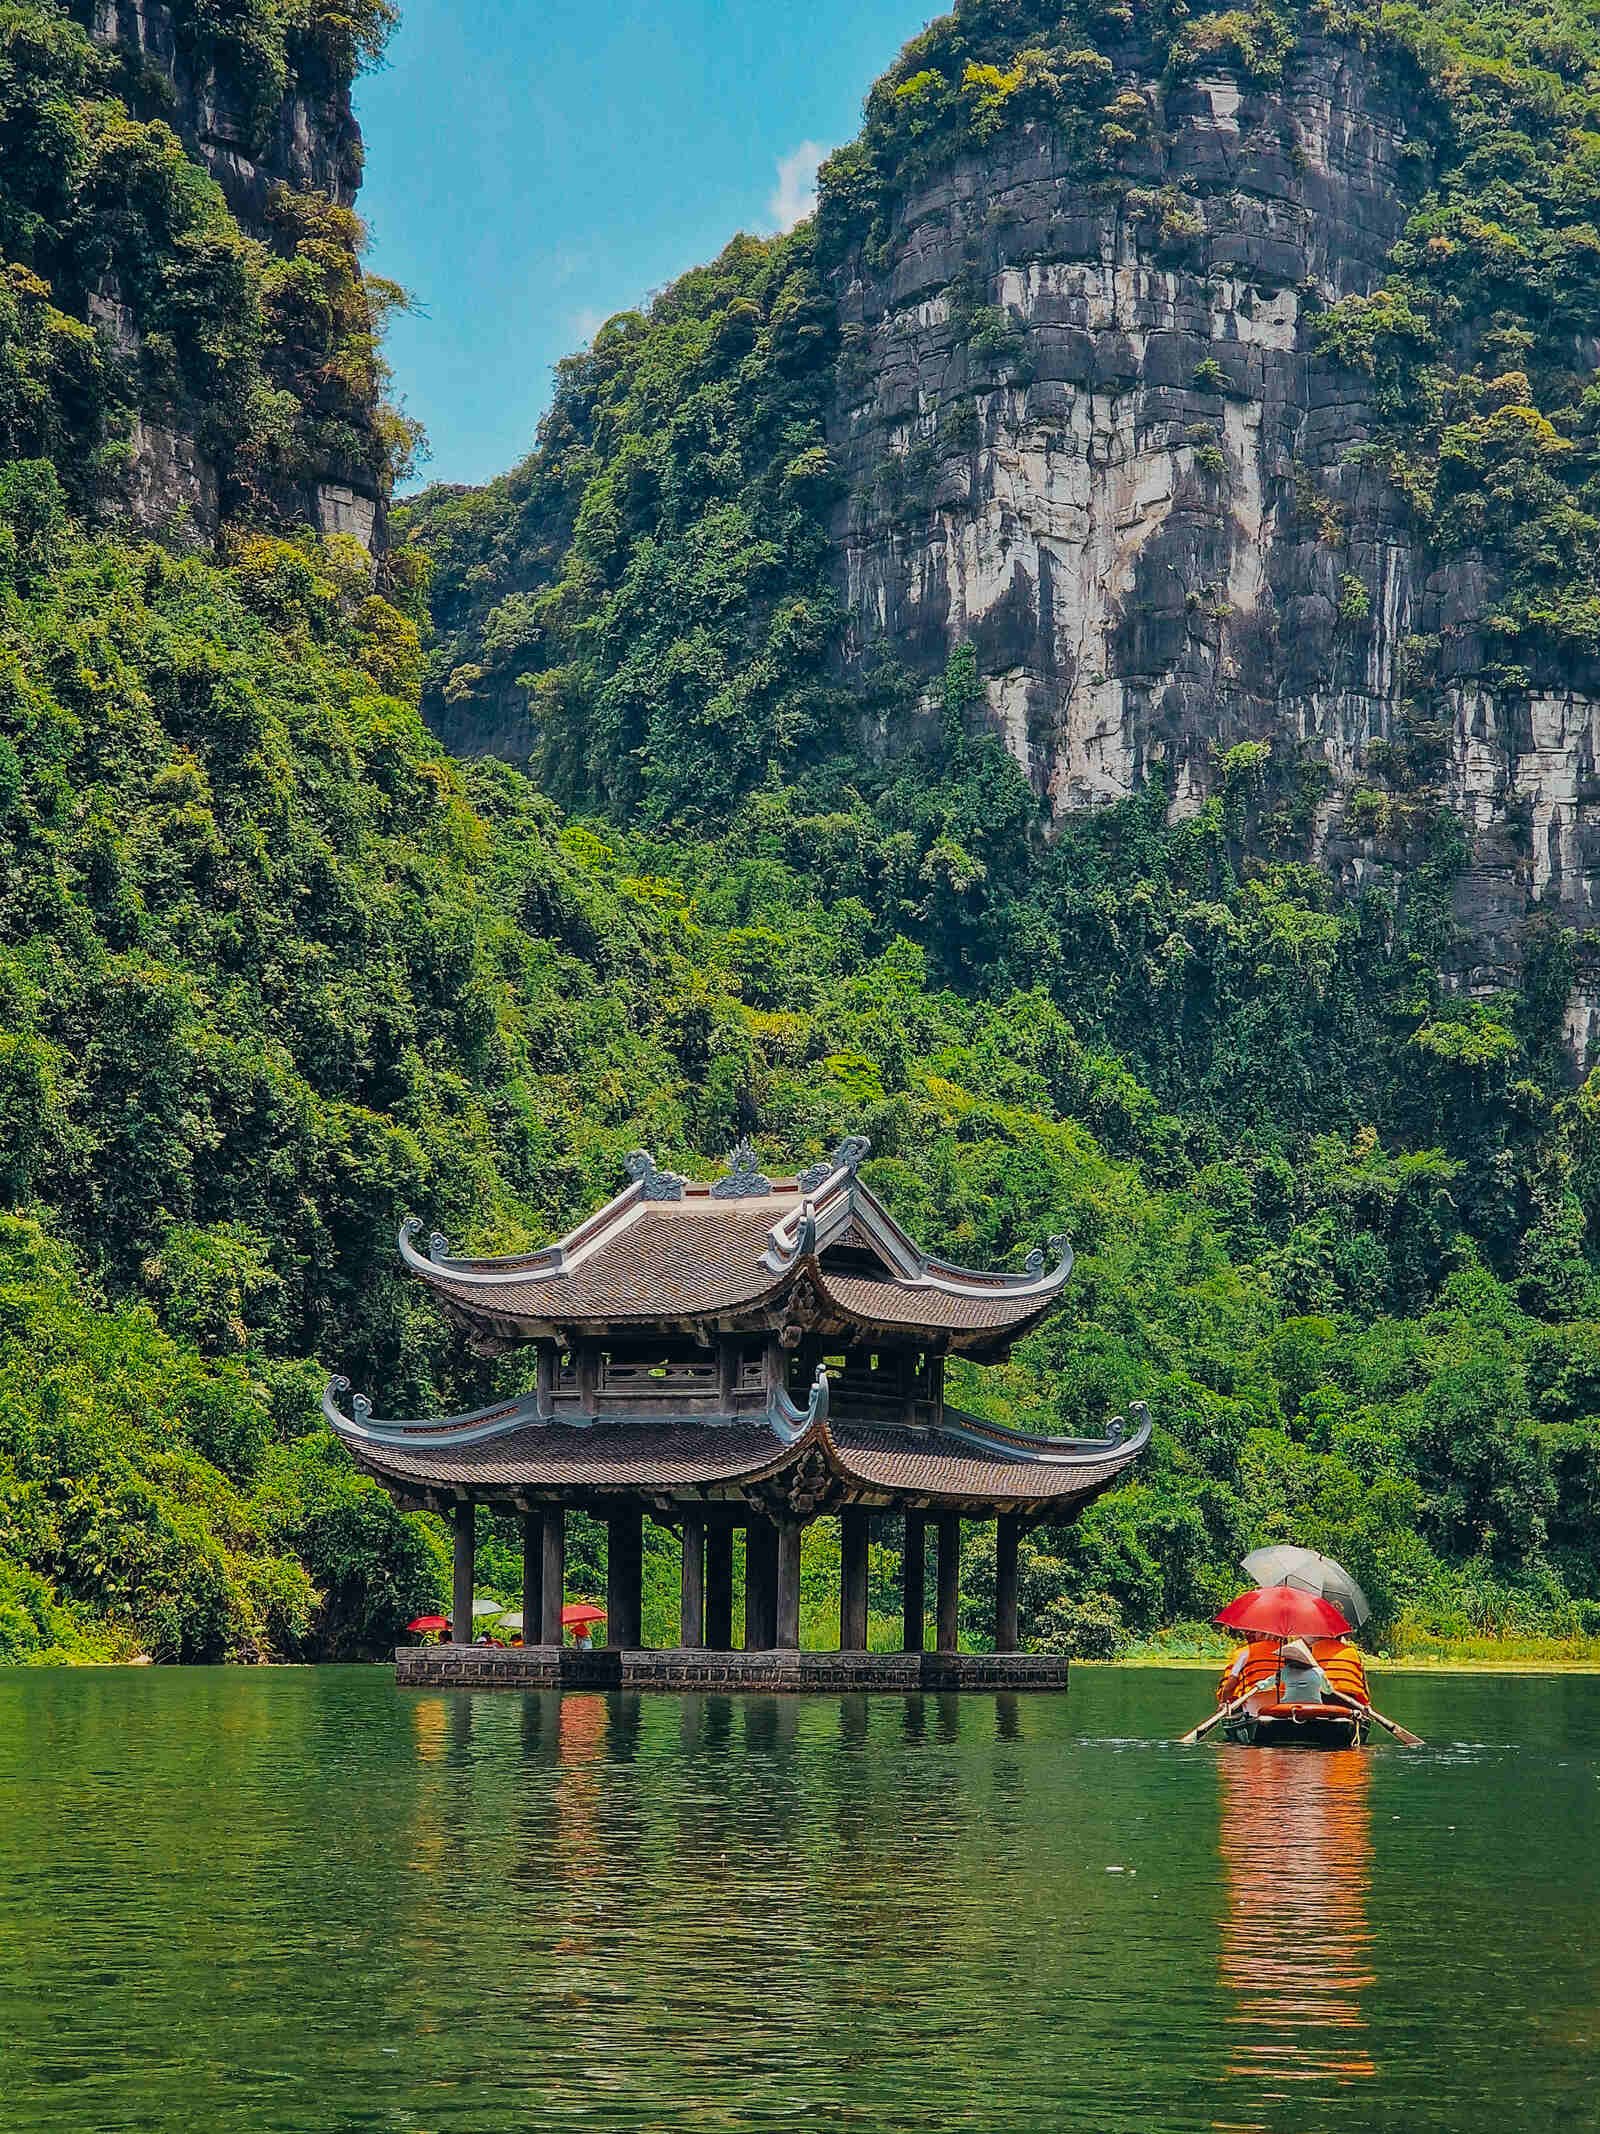 a boat with people in holding umbrellas on a rive with a pagoda in it, surrounded by lush green cliffs